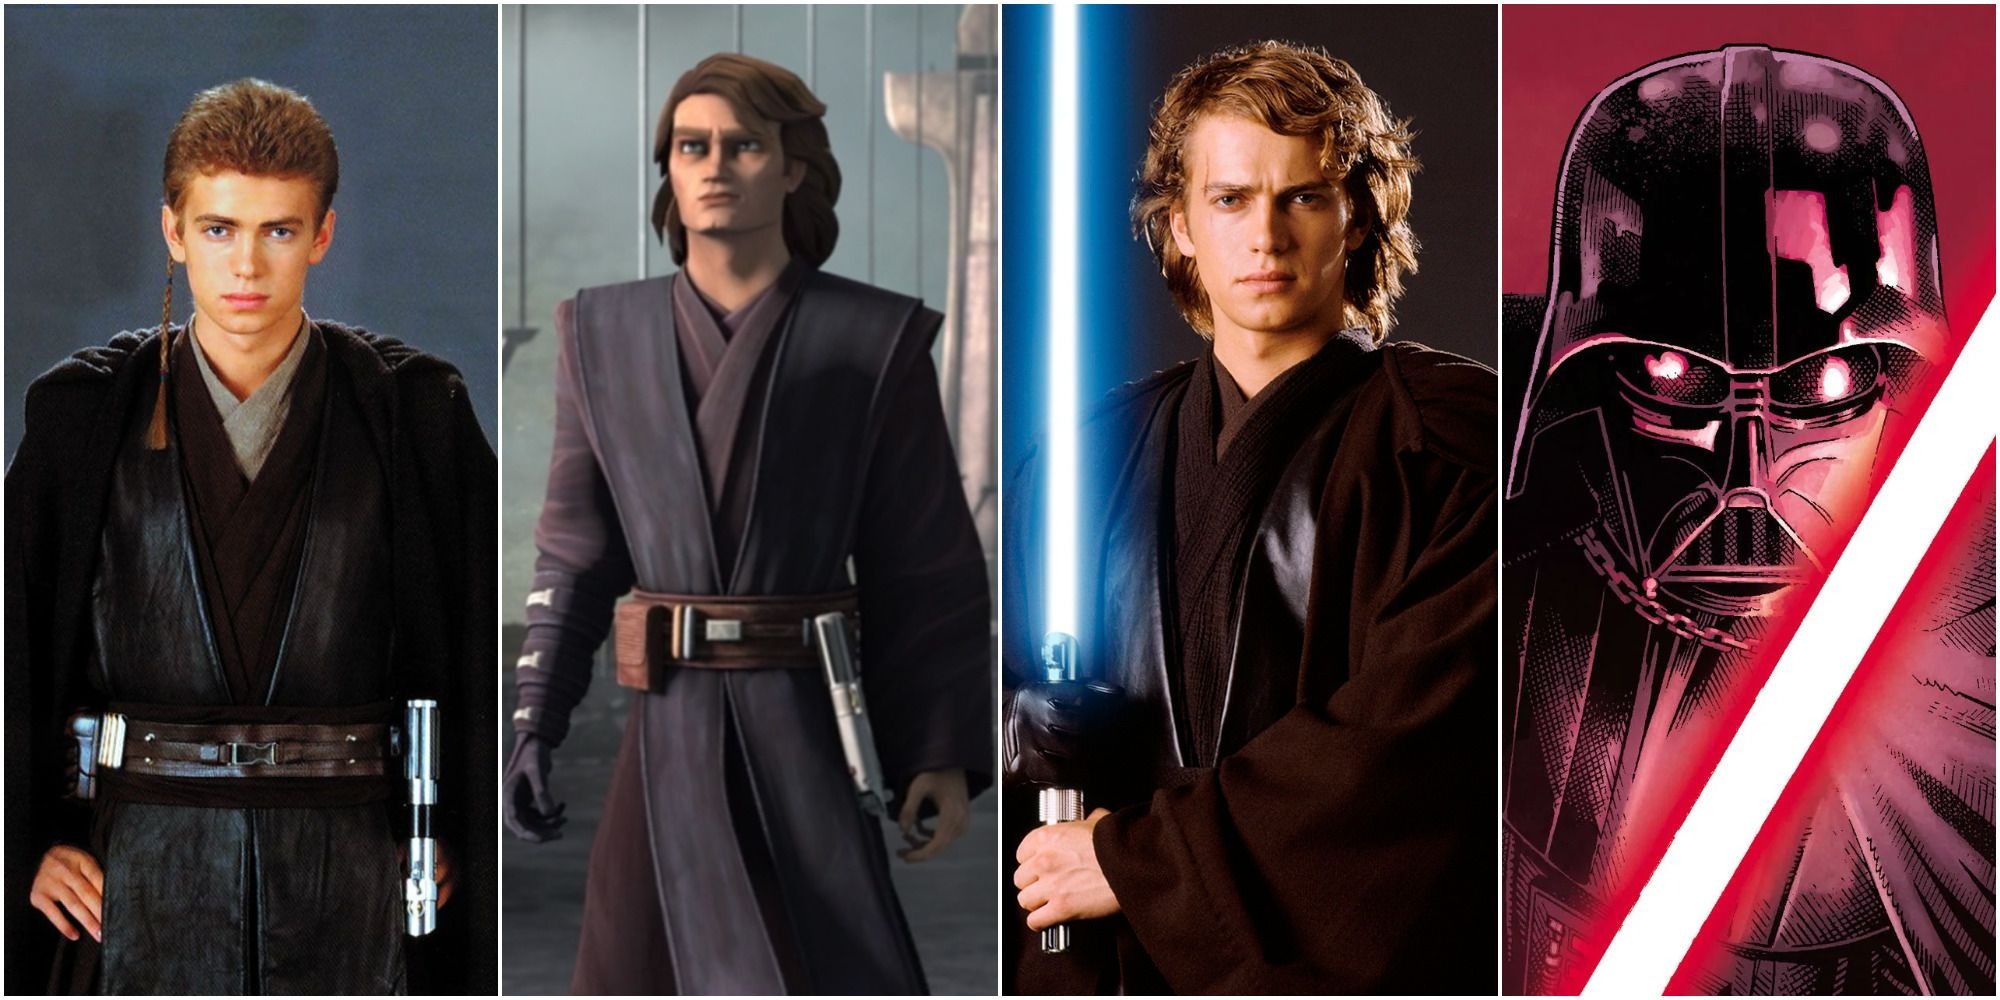 Why Did Anakin Skywalker Become Darth Vader